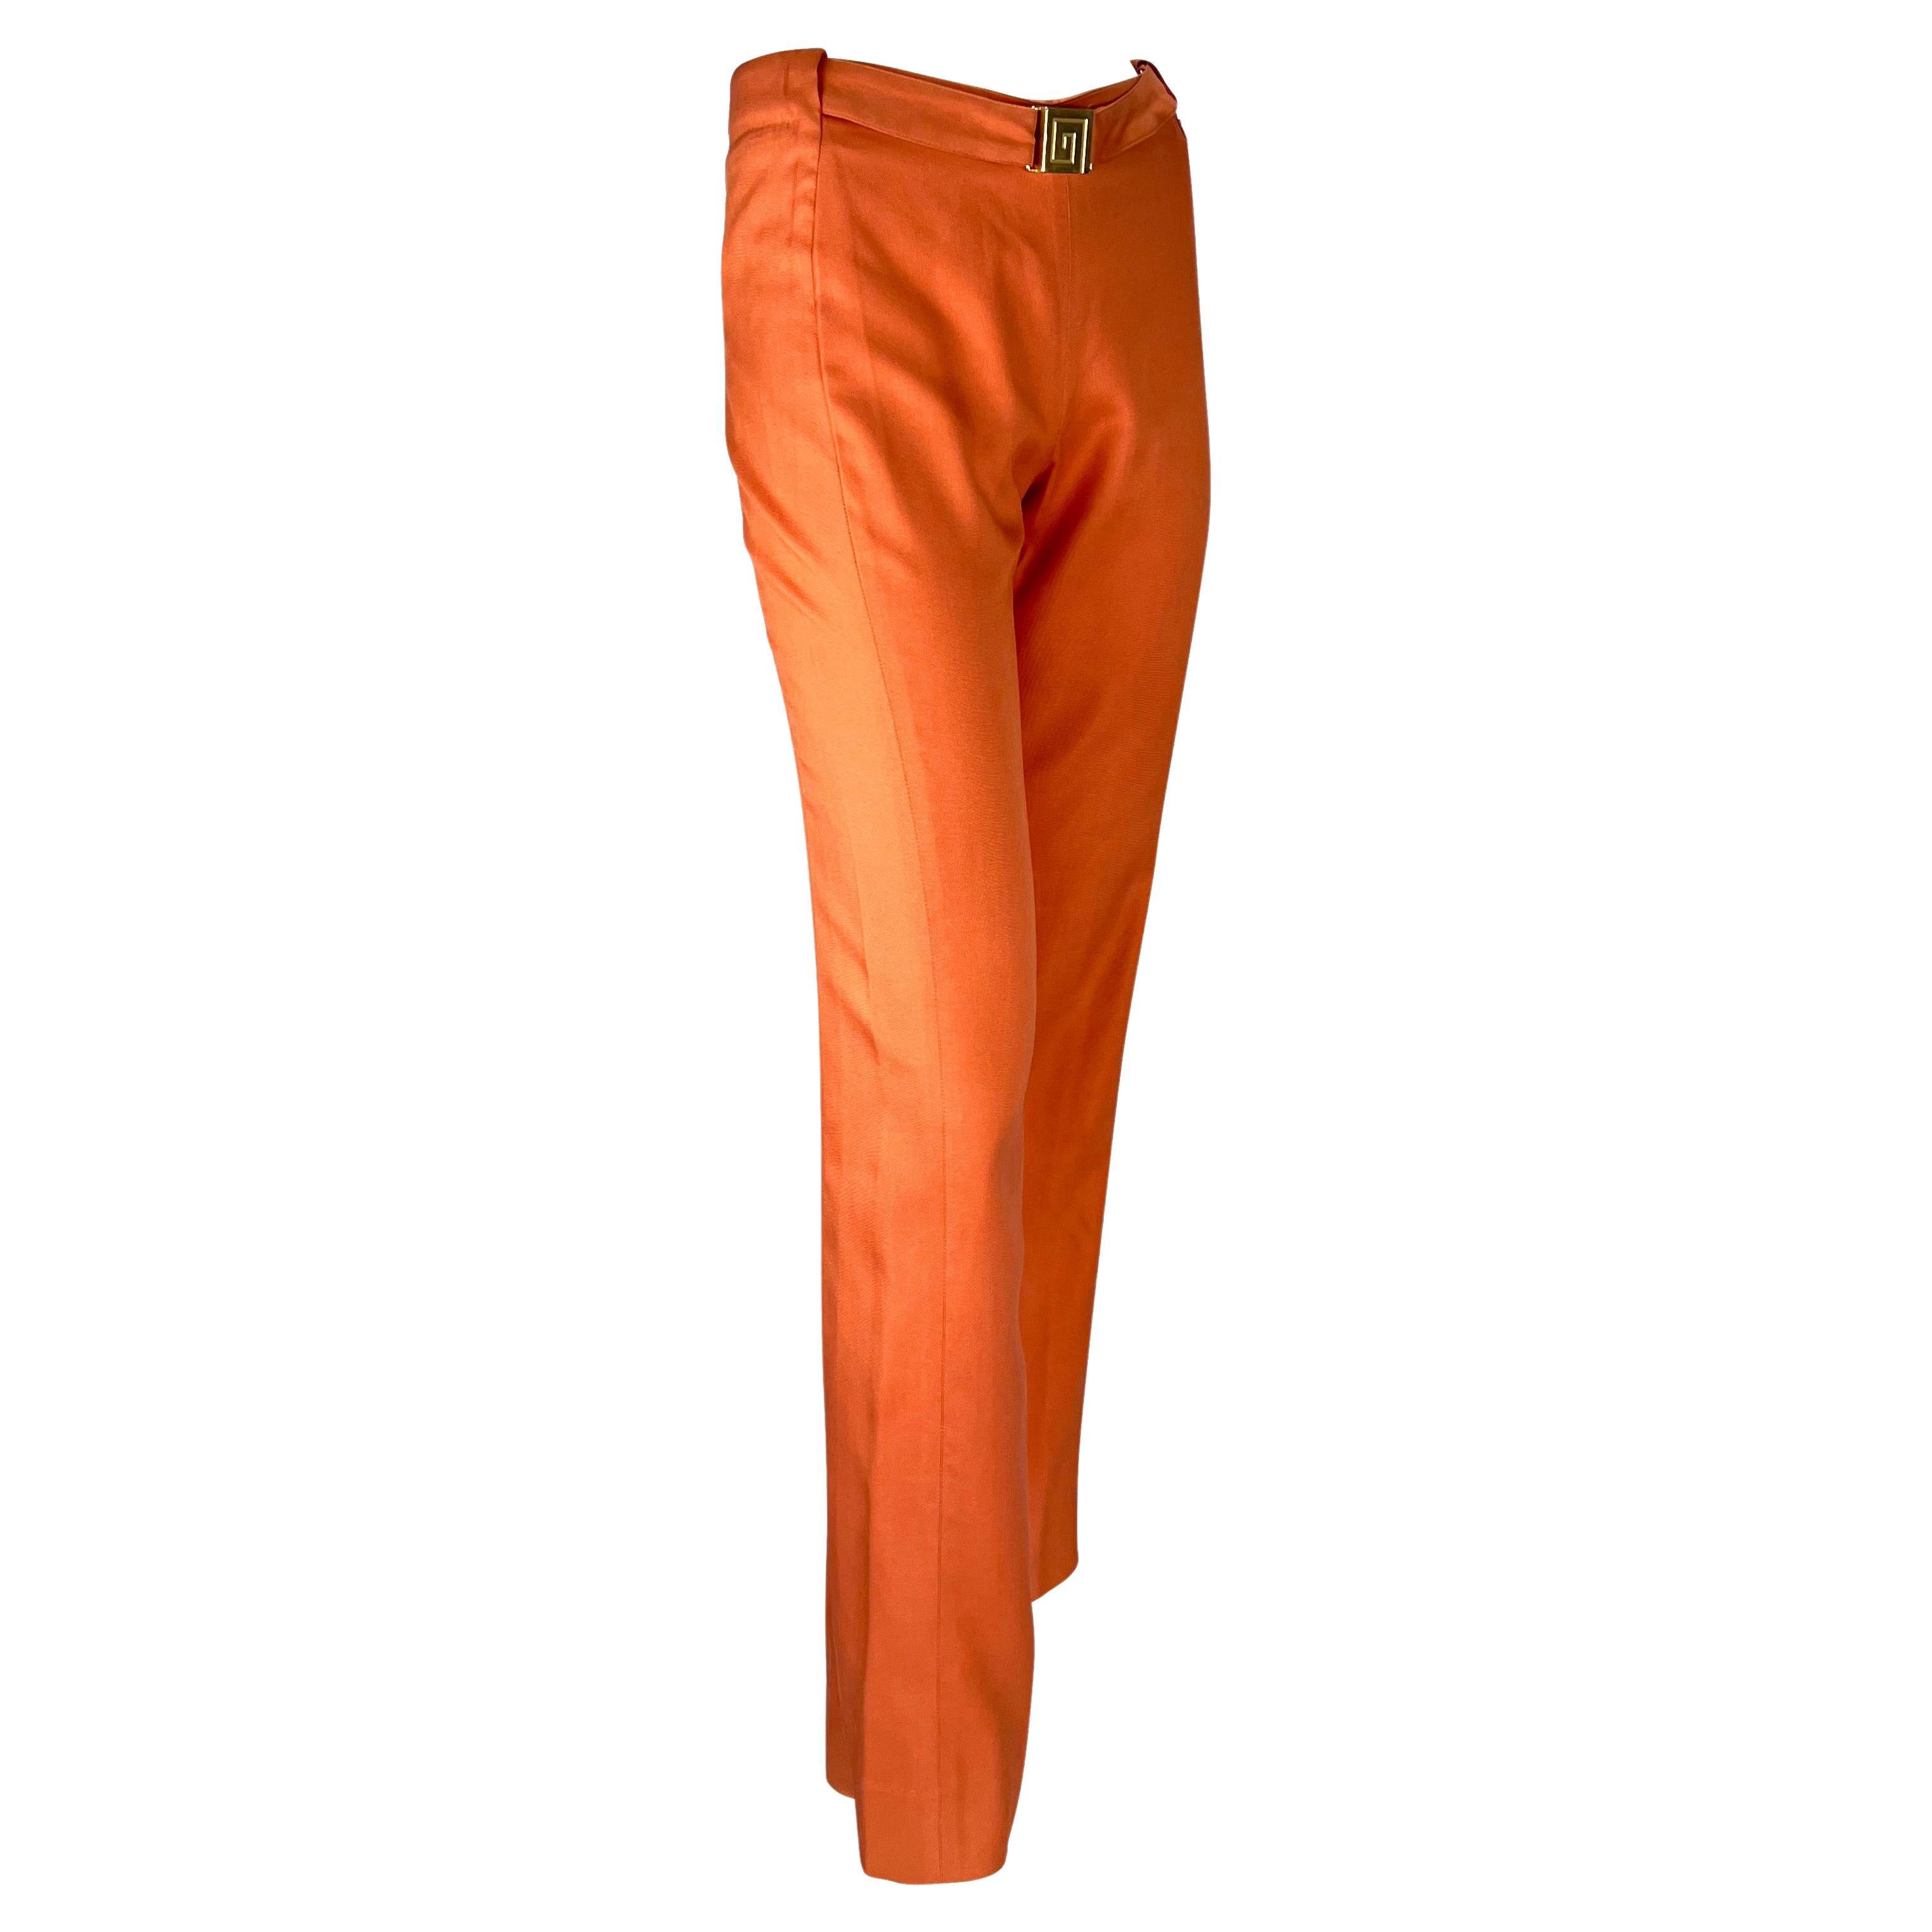 F/W 2000 Gianni Versace by Donatella Orange Silk Greek Key Buckle Belted Pants In Good Condition For Sale In West Hollywood, CA